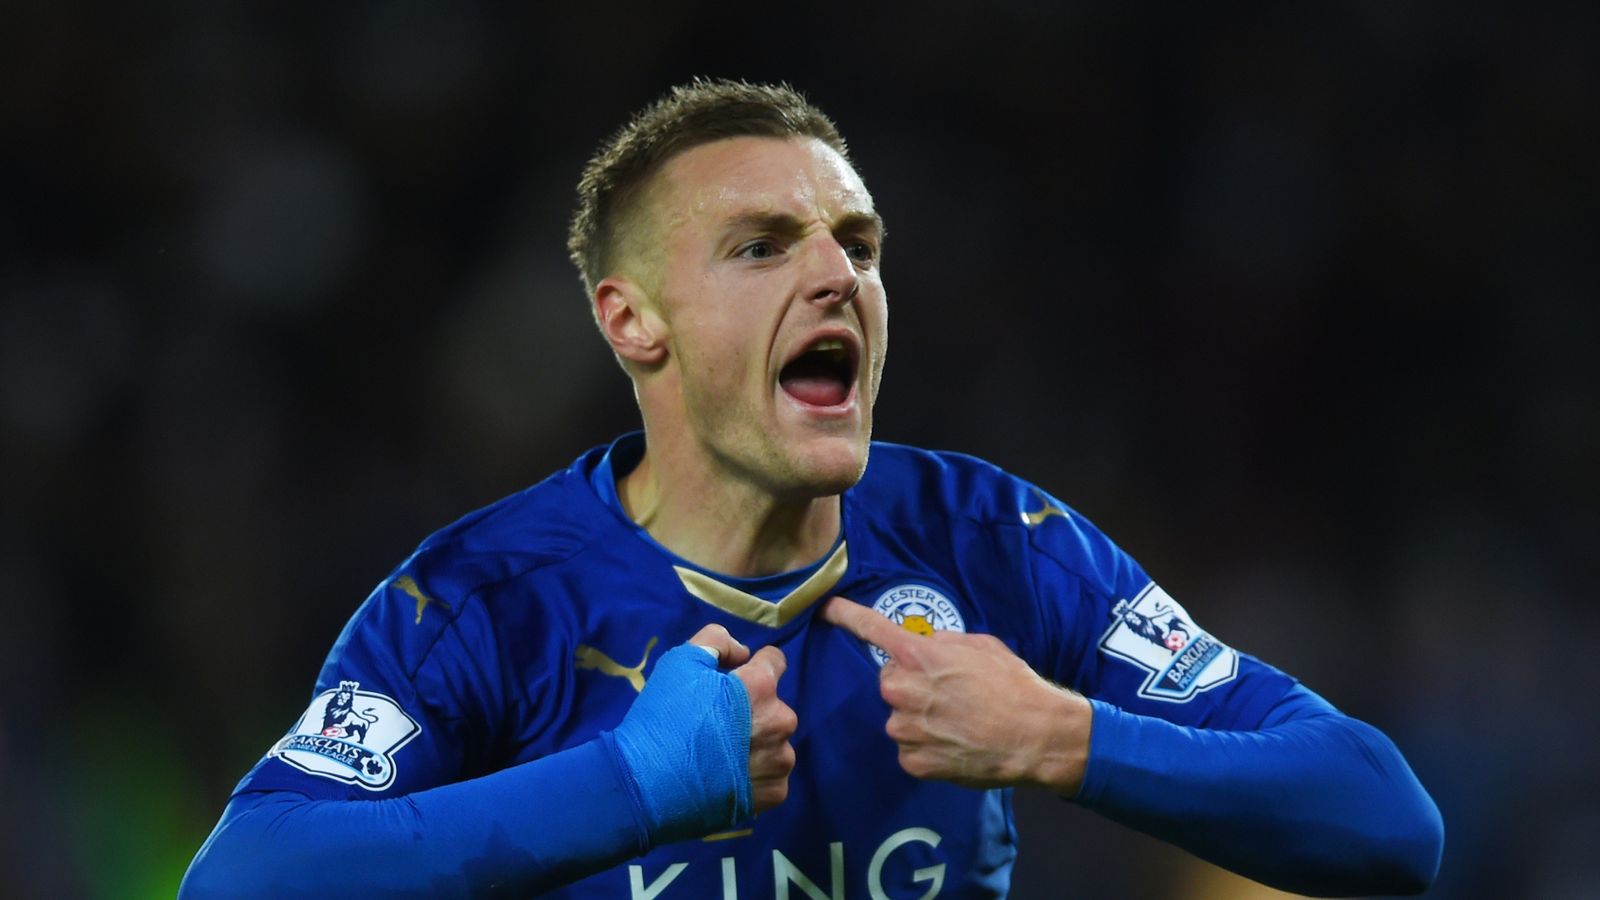 Jamie Vardy close to doubling wages with new Leicester deal - Sky sources |  Football News | Sky Sports